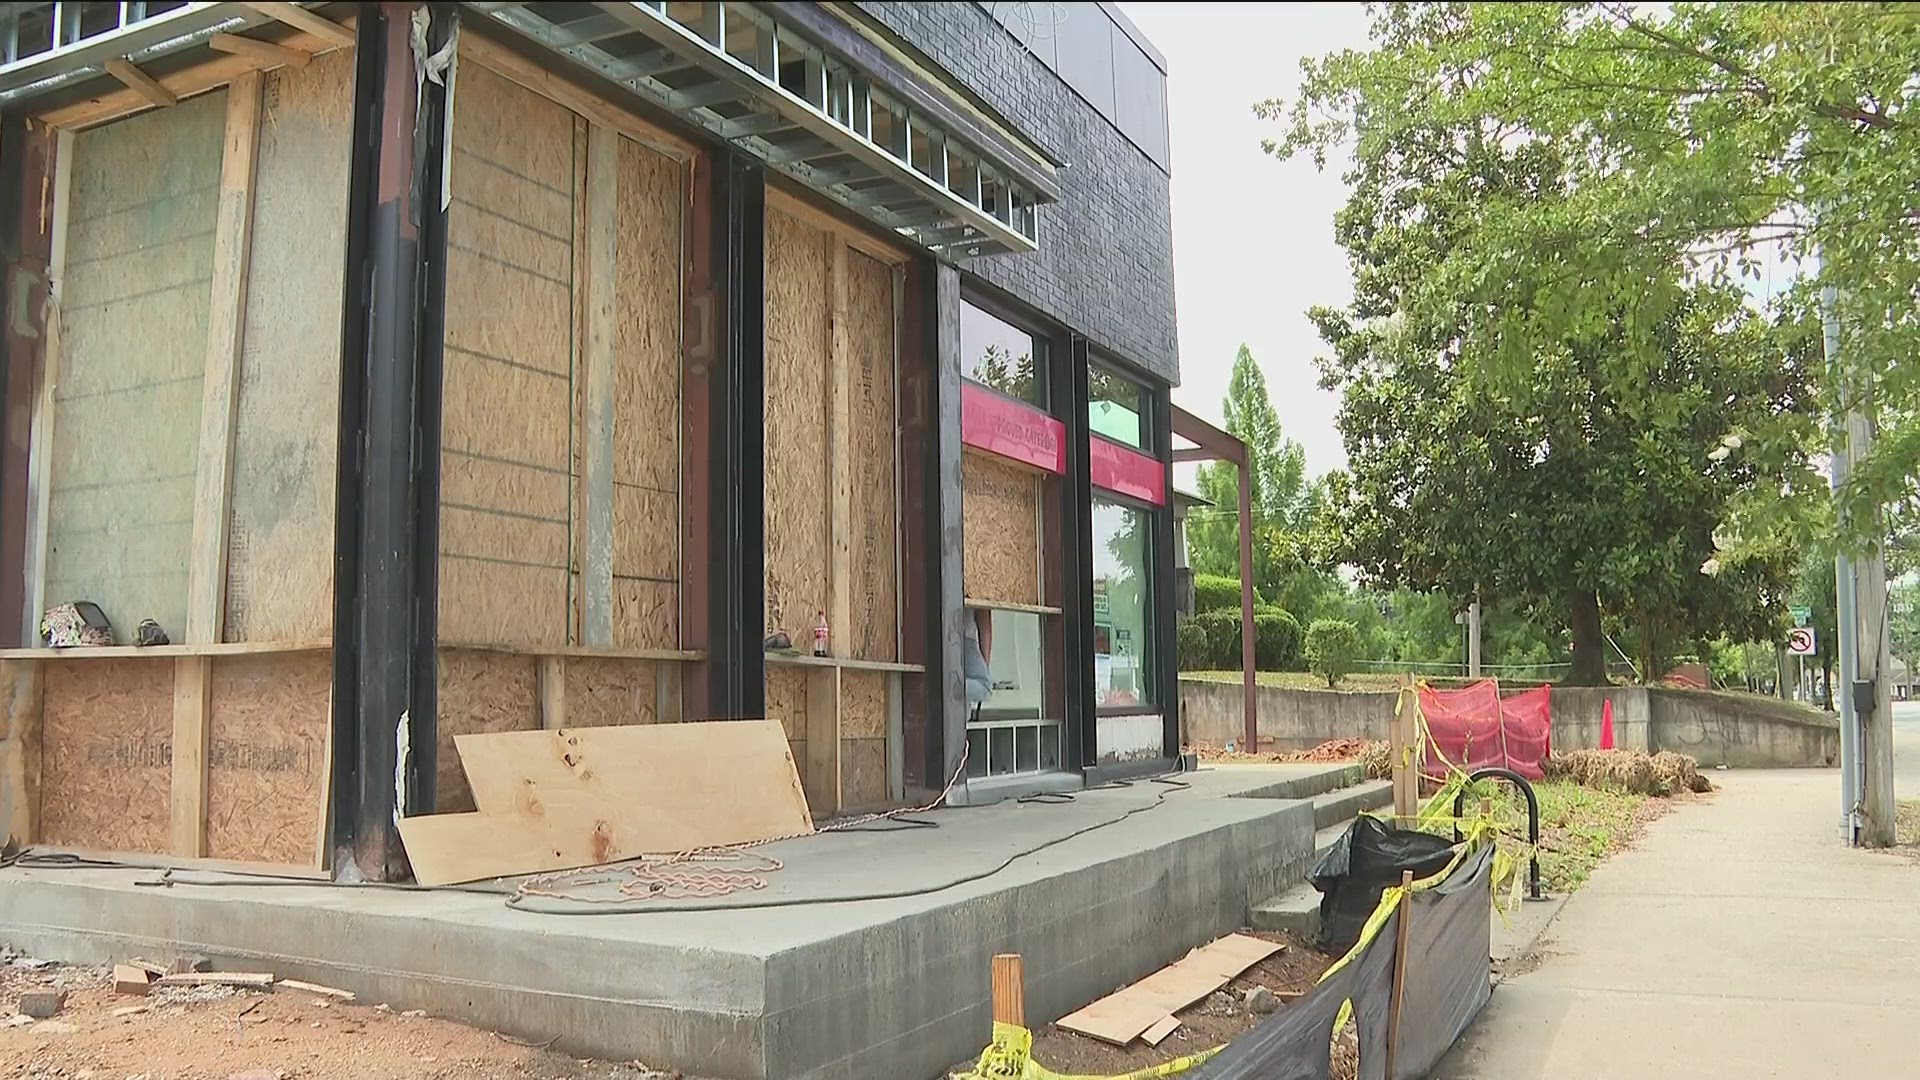 A former Jimmy Johns drive-thru is being renovated for health care in Atlanta. 11Alive's Joe Ripley spoke with the creators behind the new urgent care drive-thru.